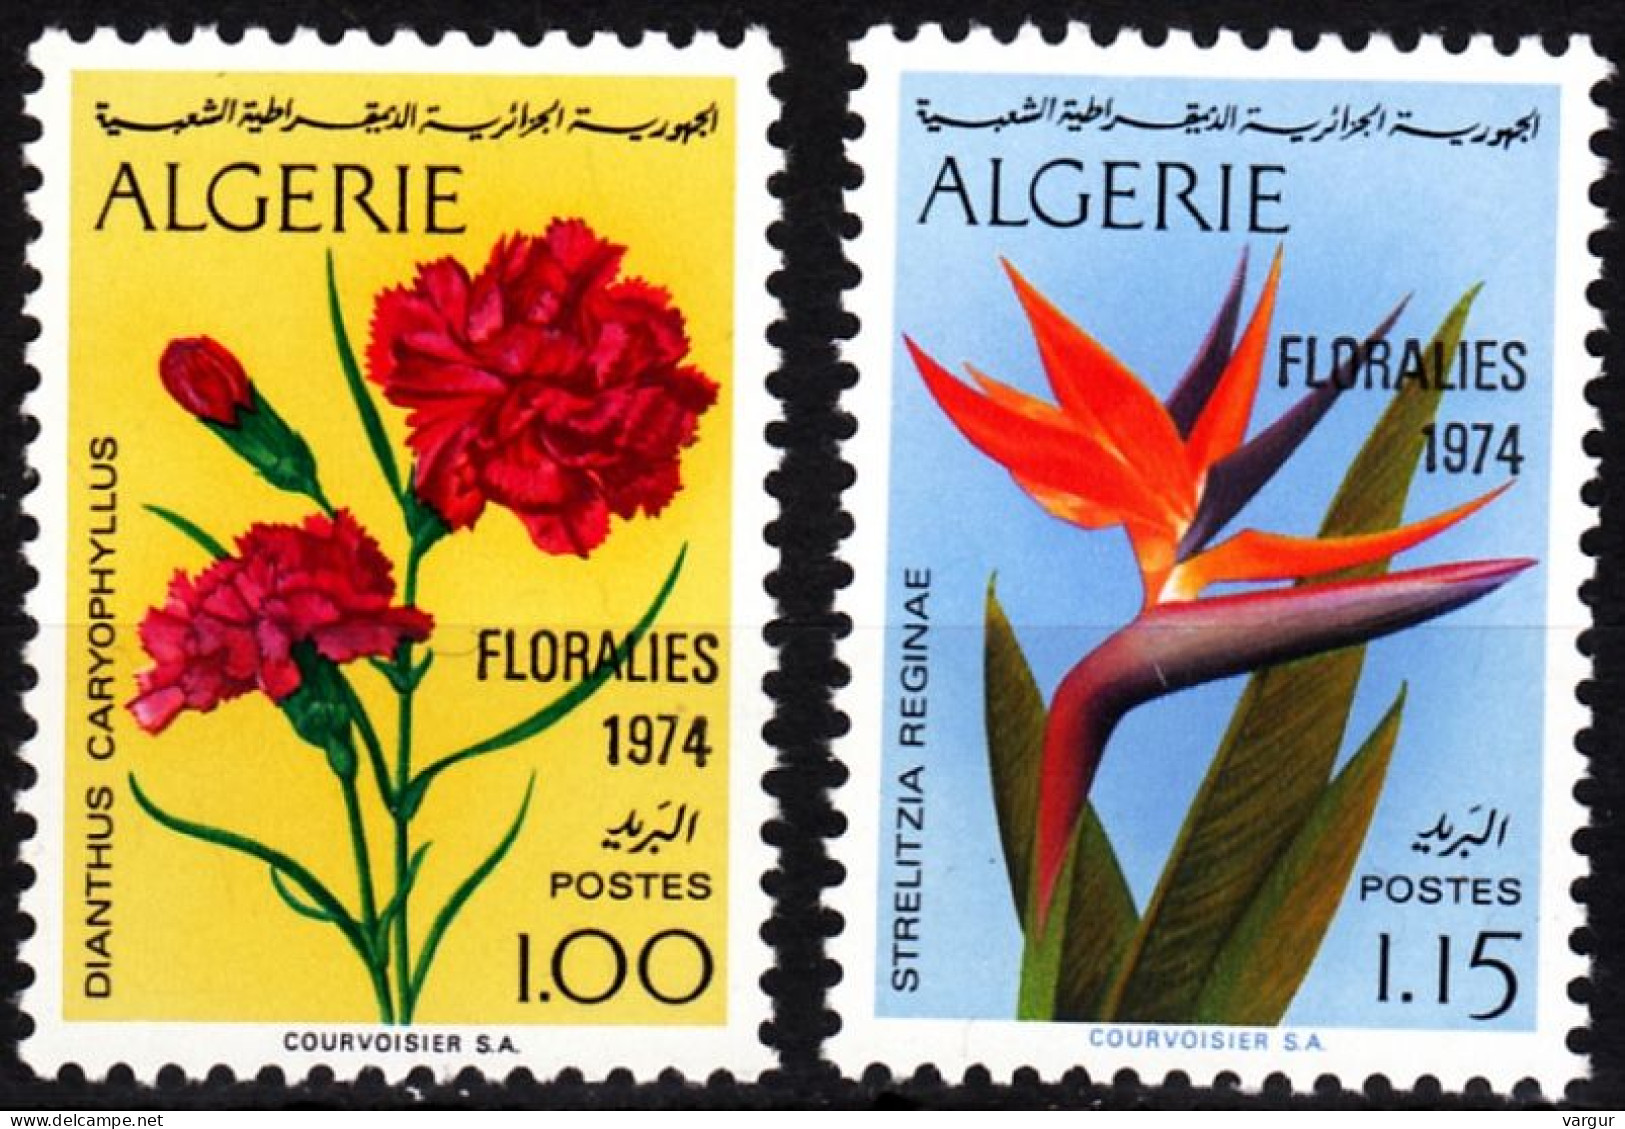 ALGERIA 1974 Flowers. Pink Orchid, Overprinted. Complete, MNH - Orquideas